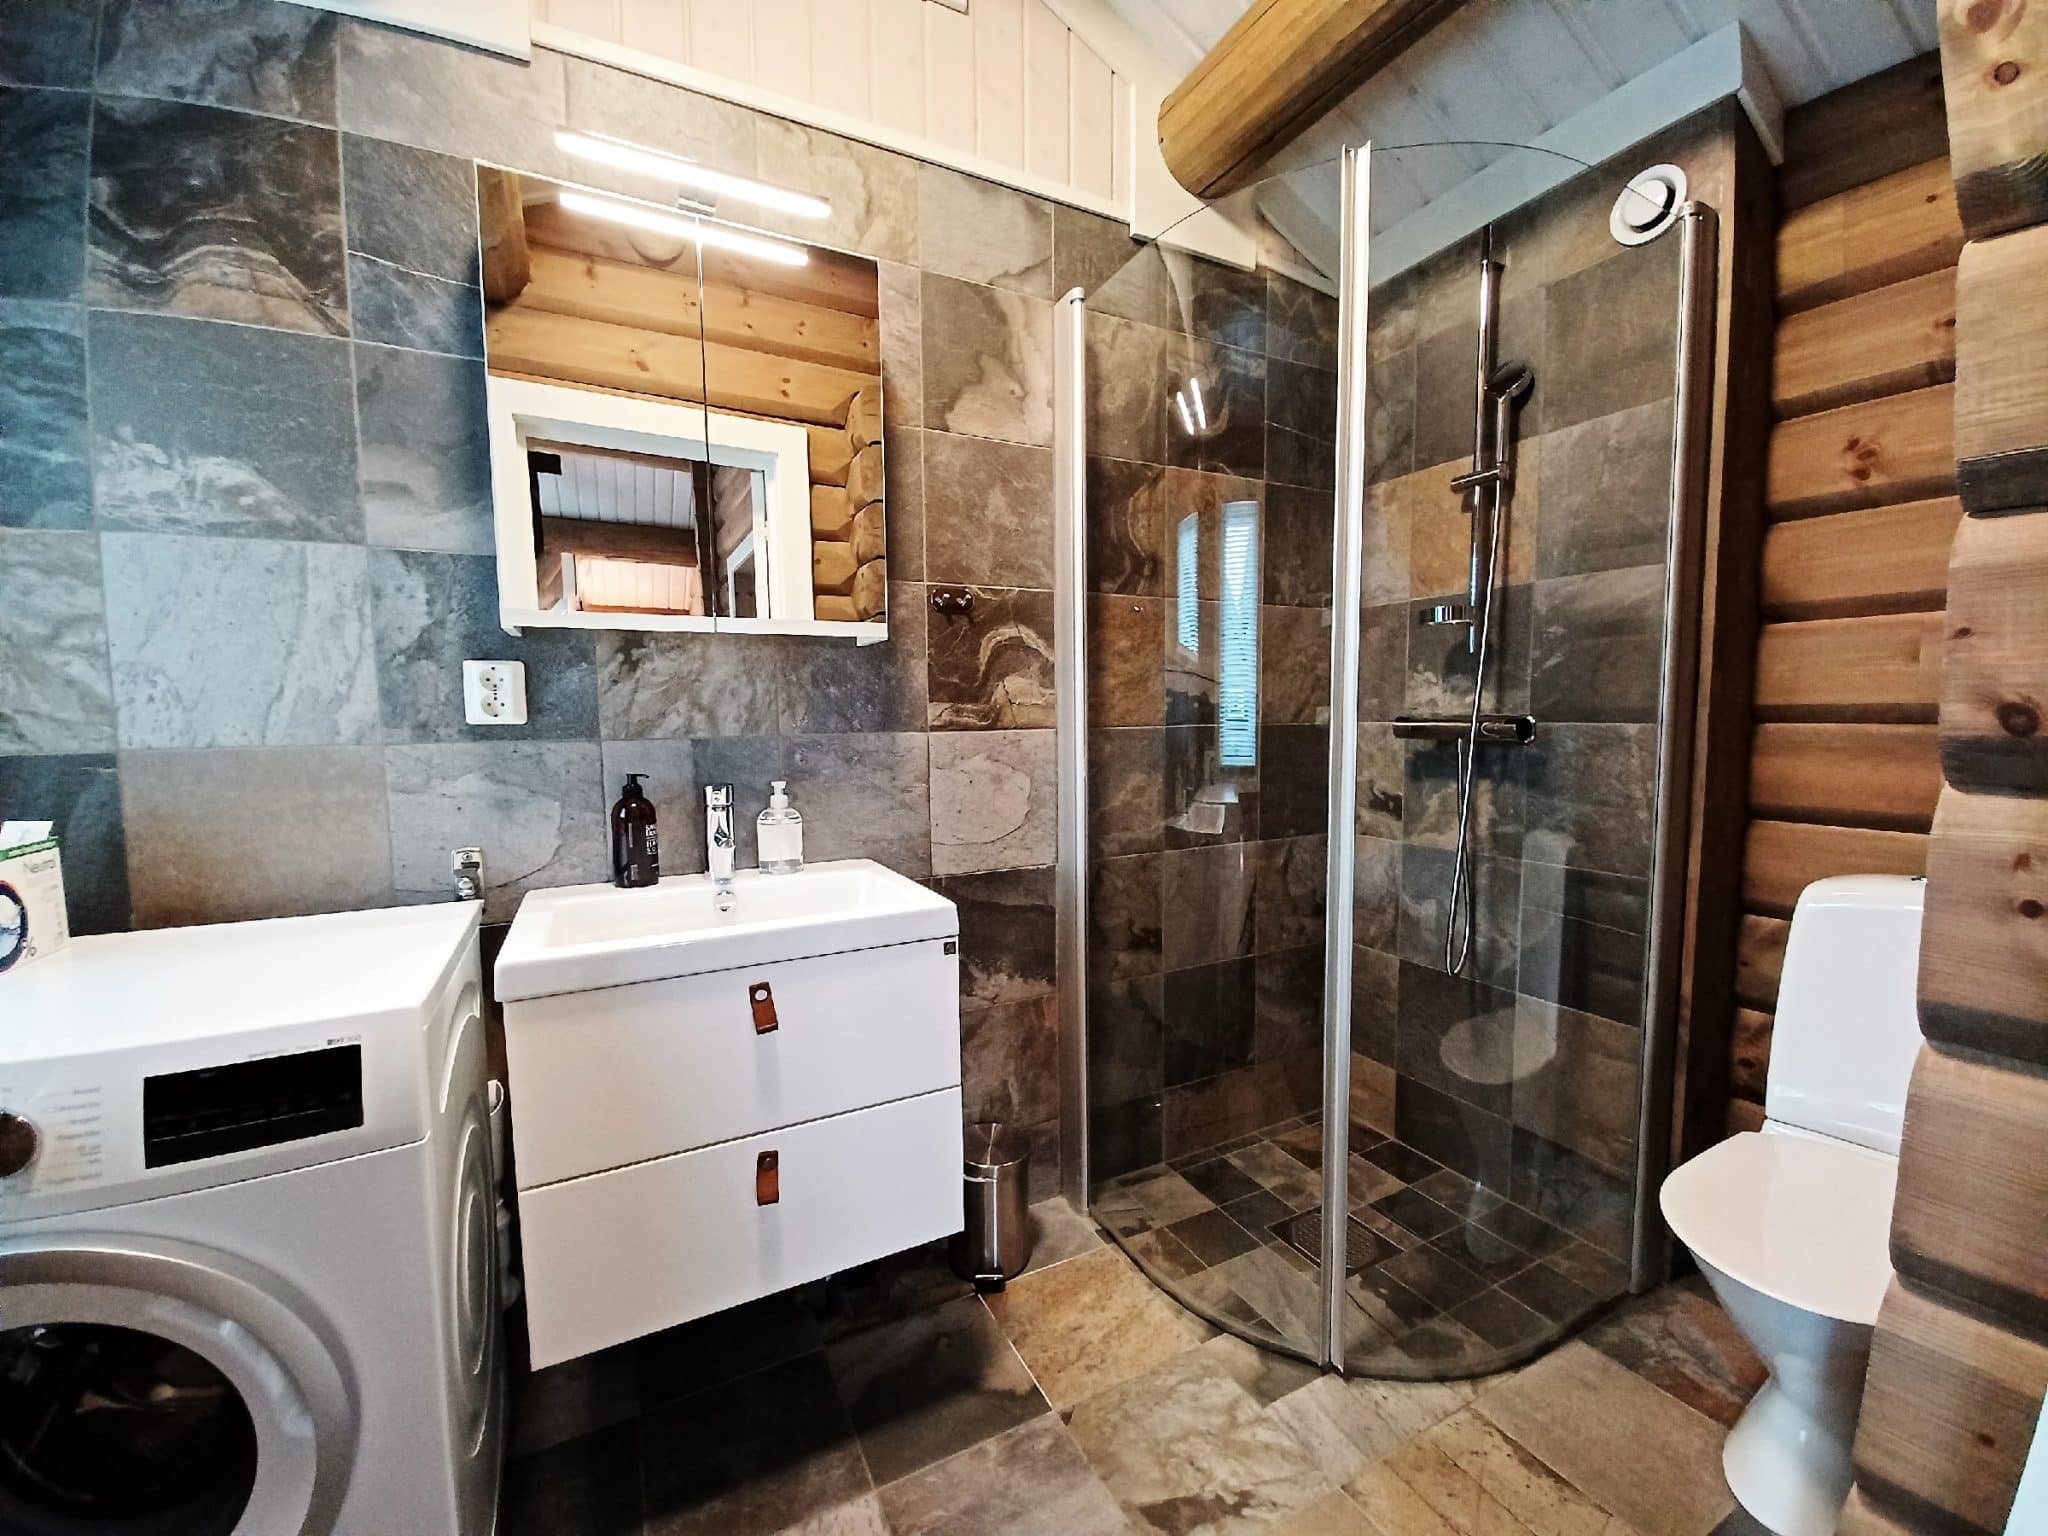 Bathroom with wooden walls and tiles.